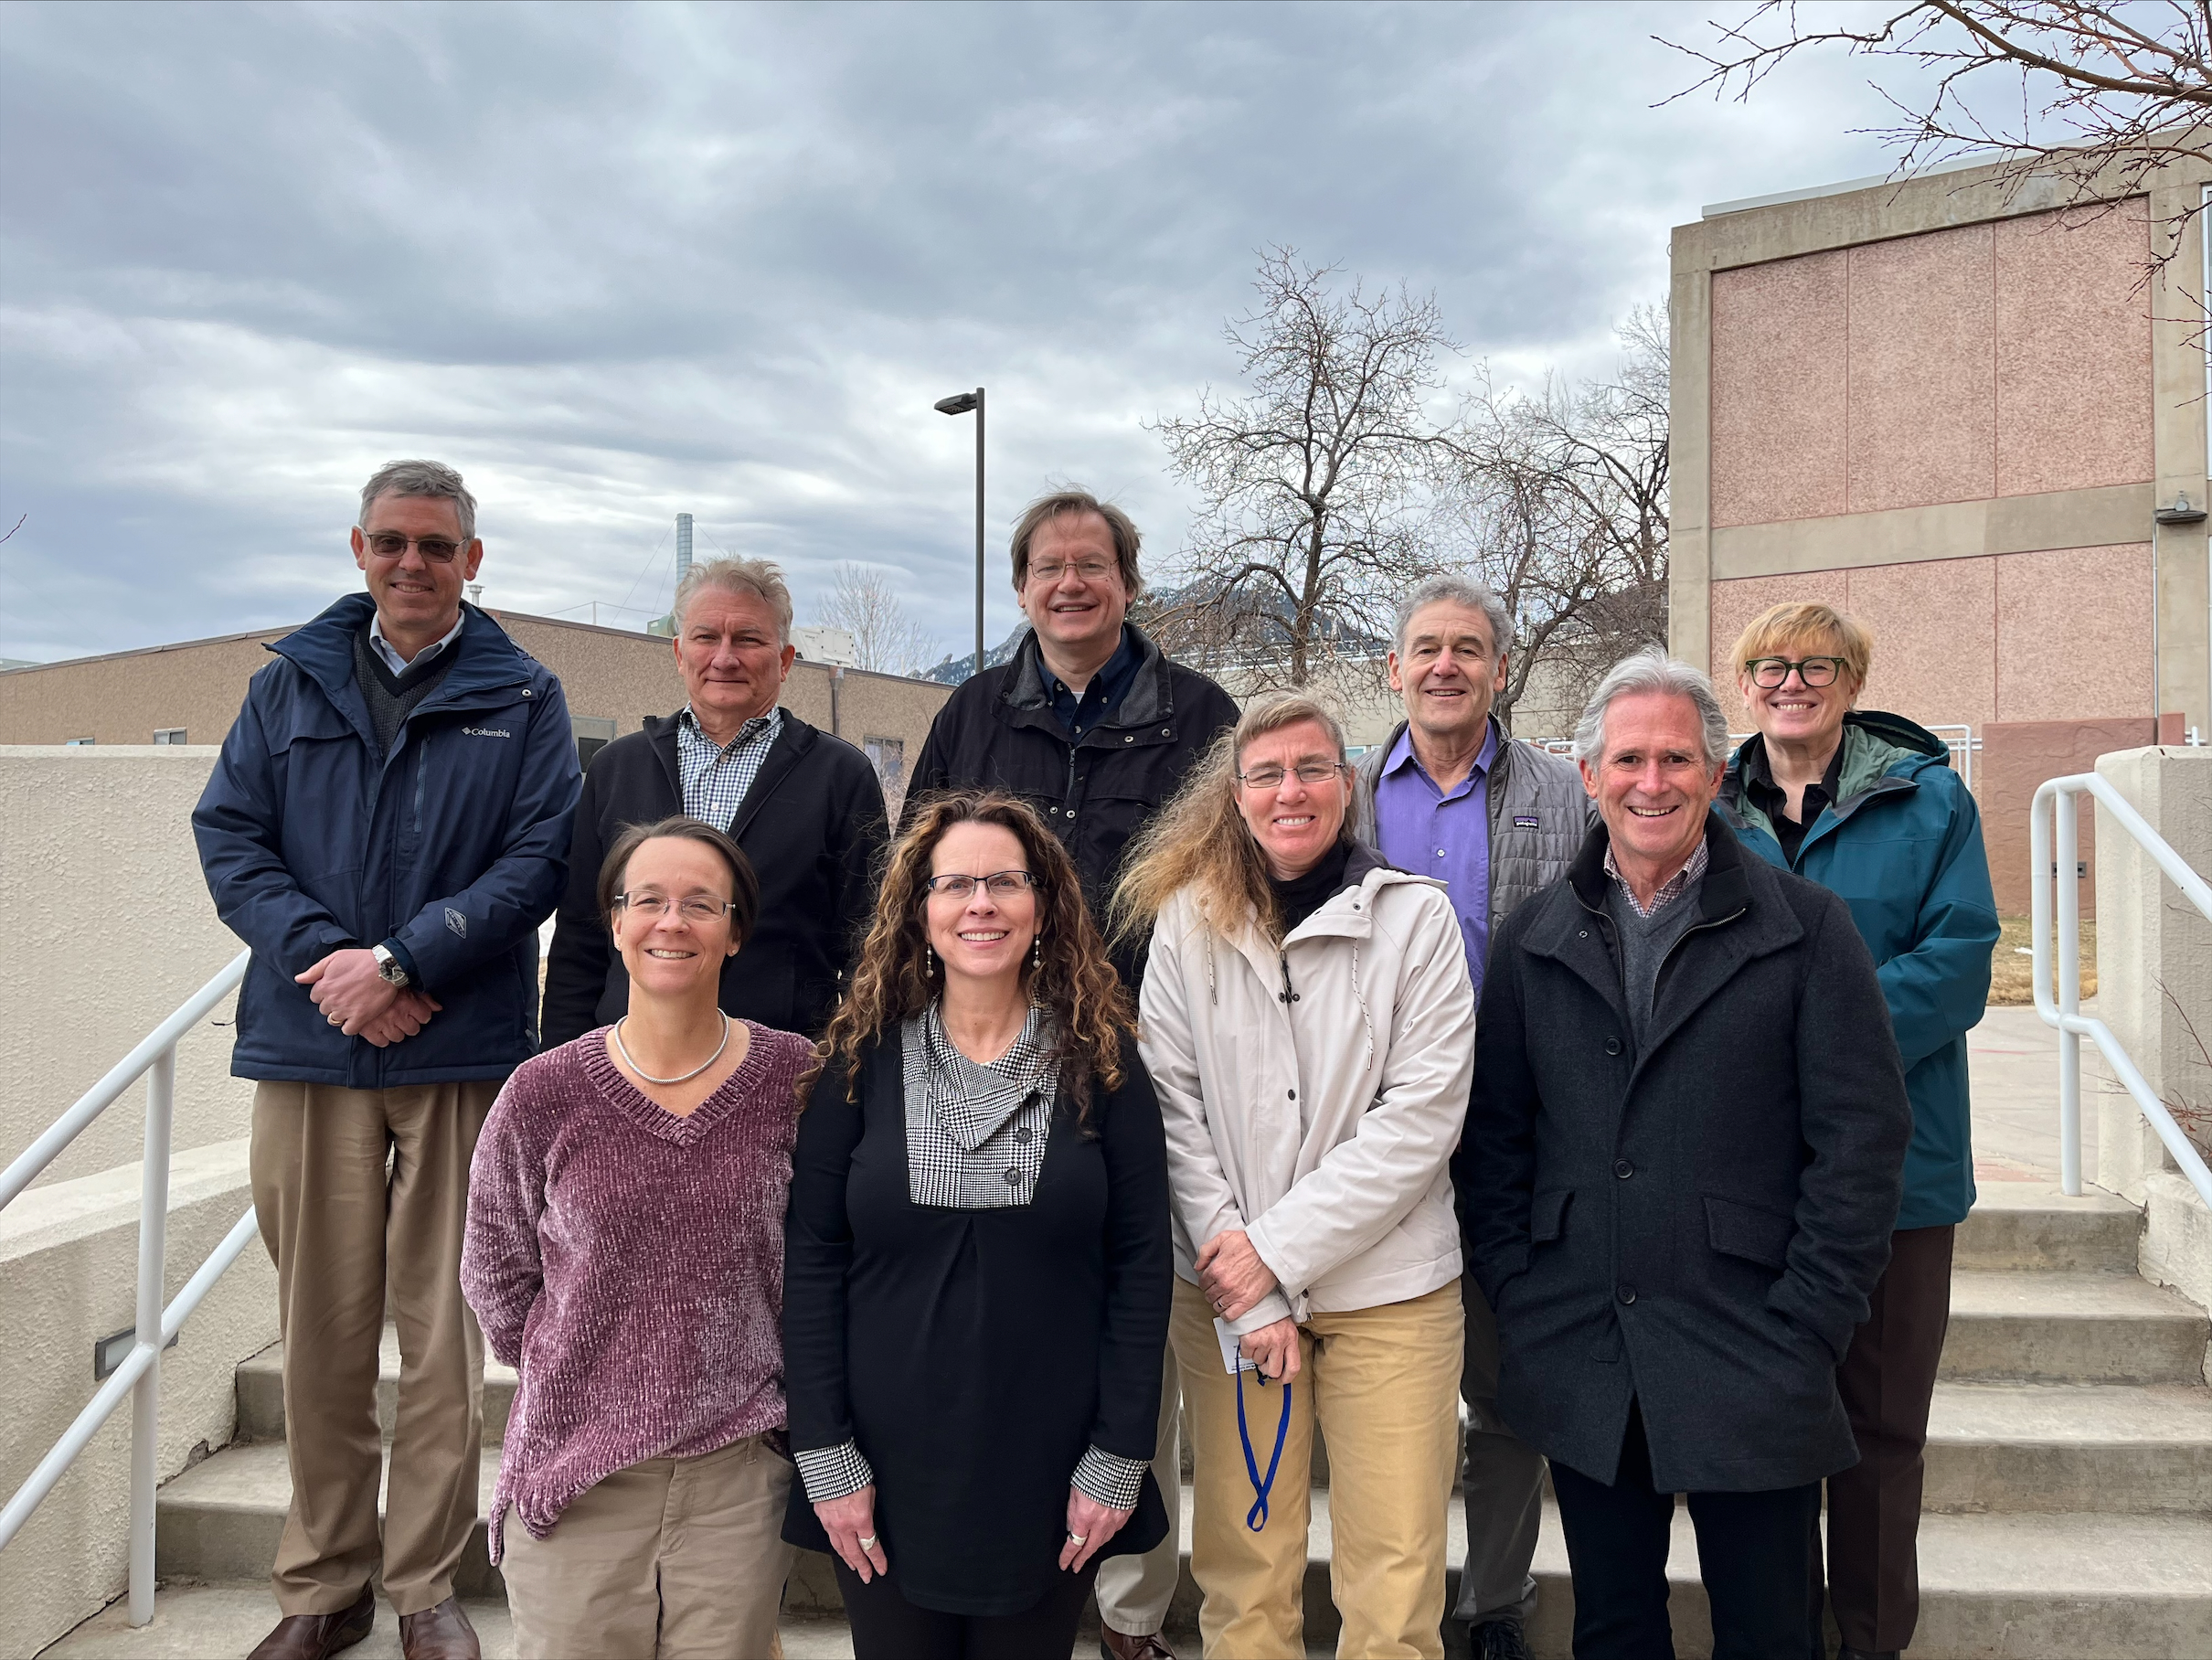 ACEHR members at the February 8-9, 2023 meeting